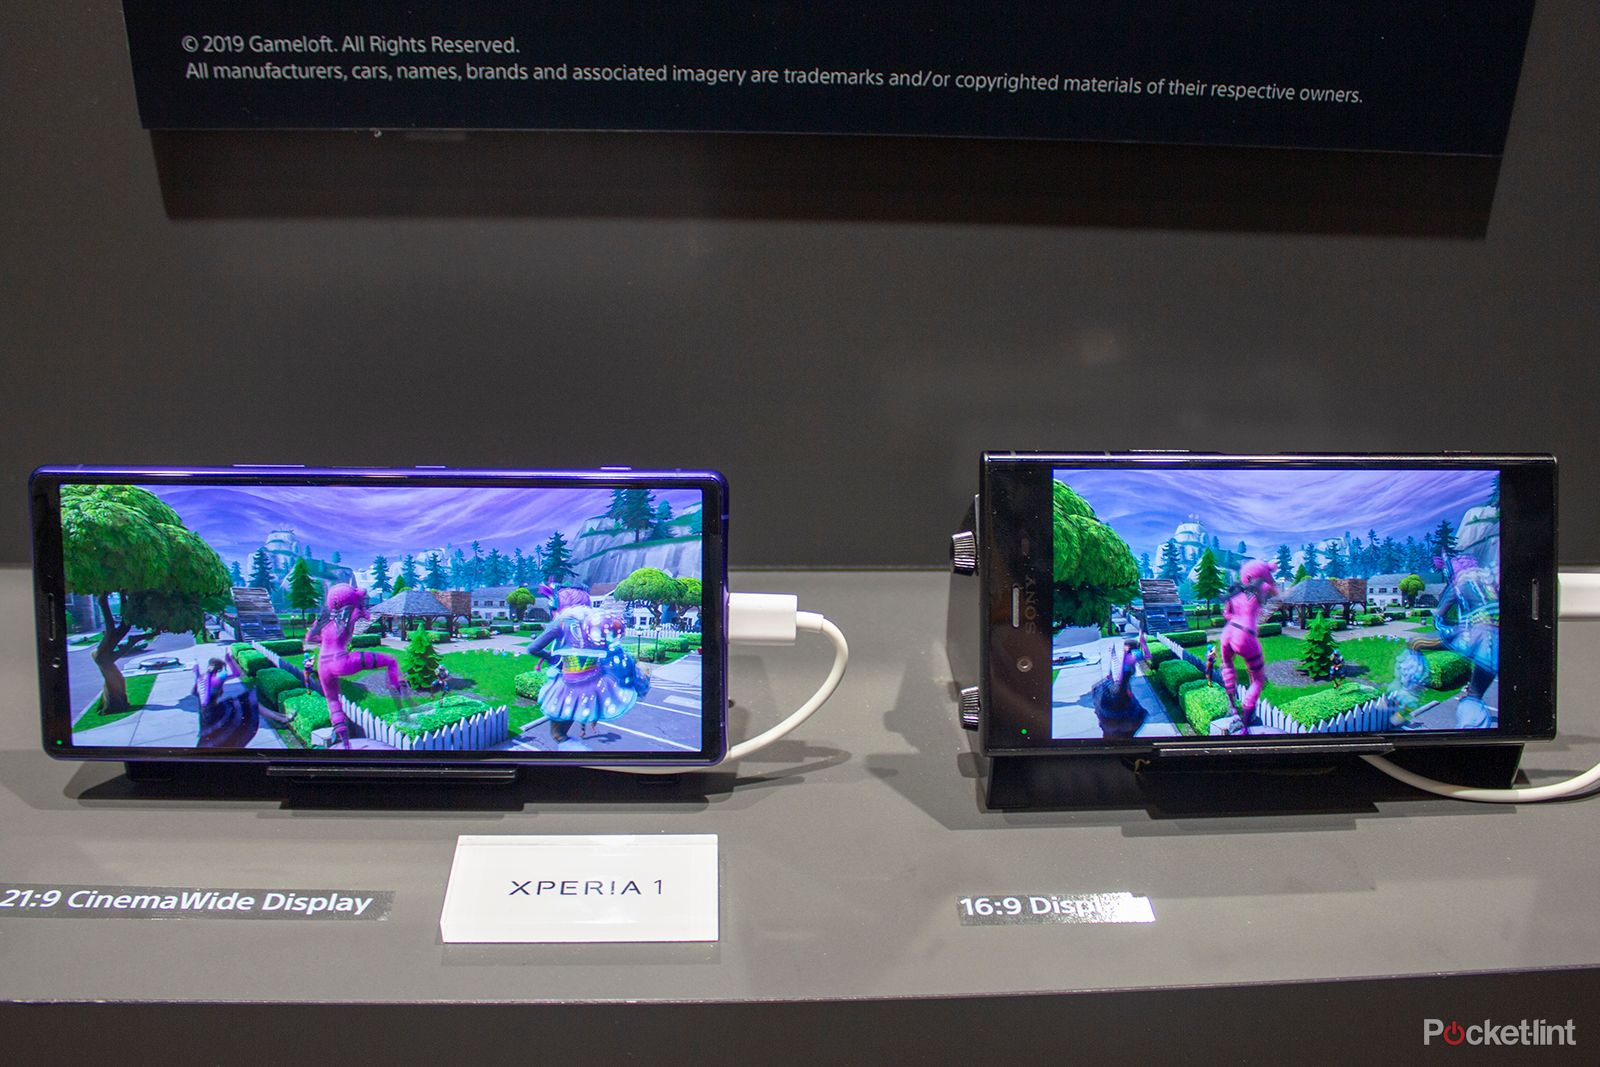 Sonys Xperia 1 has exclusive versions of Fortnite Asphalt 9 and Arena of Valor image 2